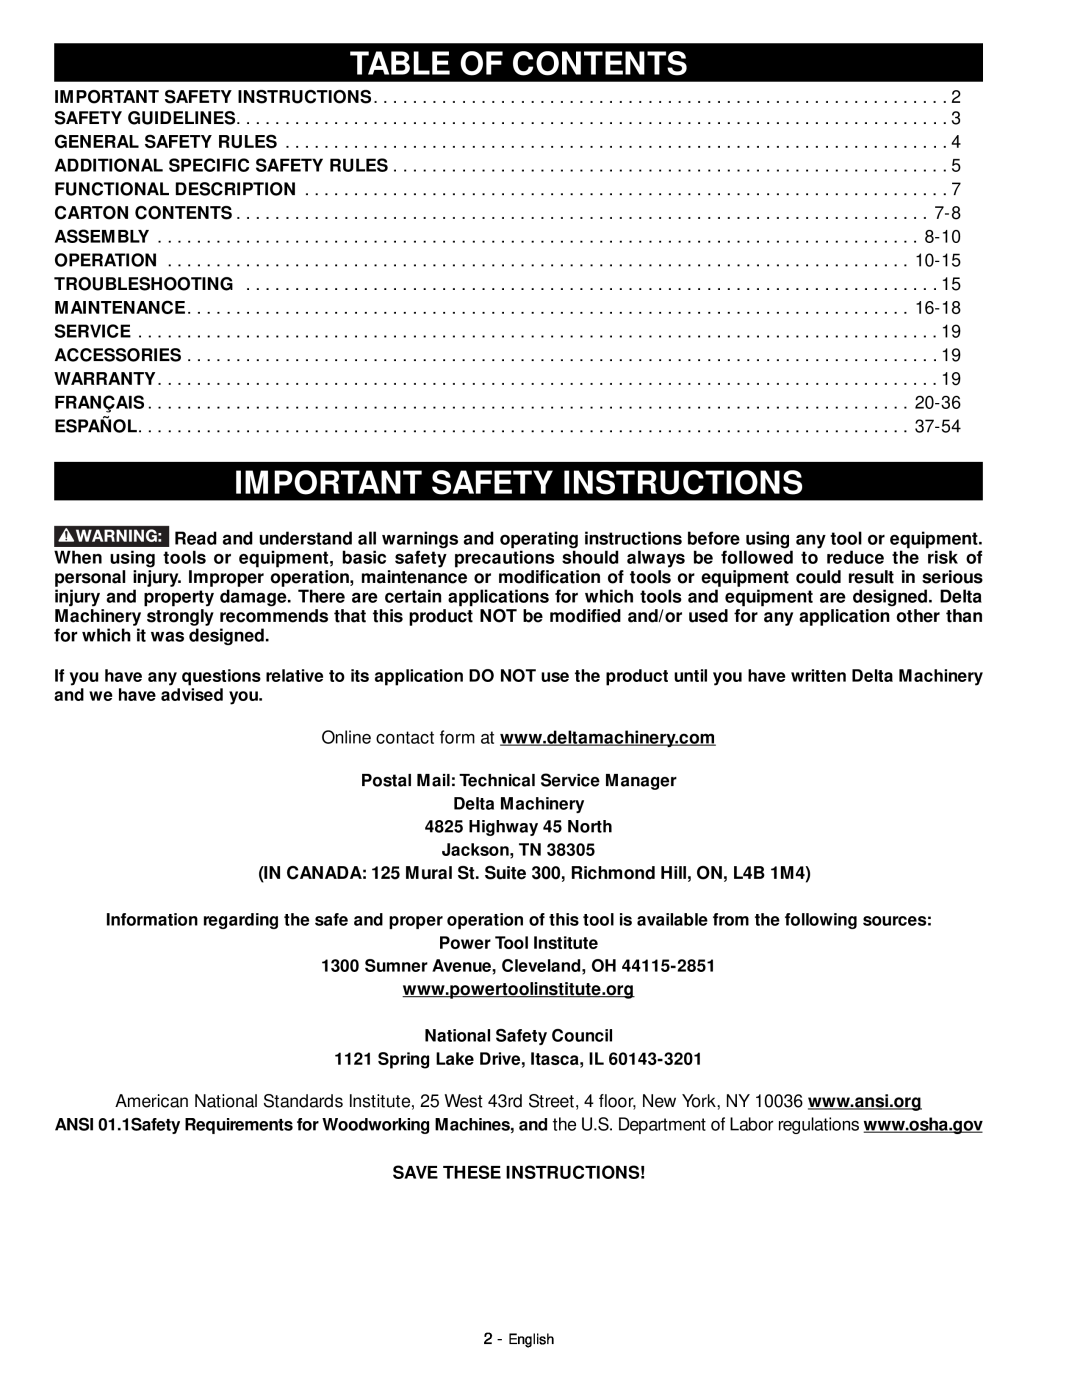 DeWalt 18657 instruction manual Table Of Contents, Important Safety Instructions, Save These Instructions 